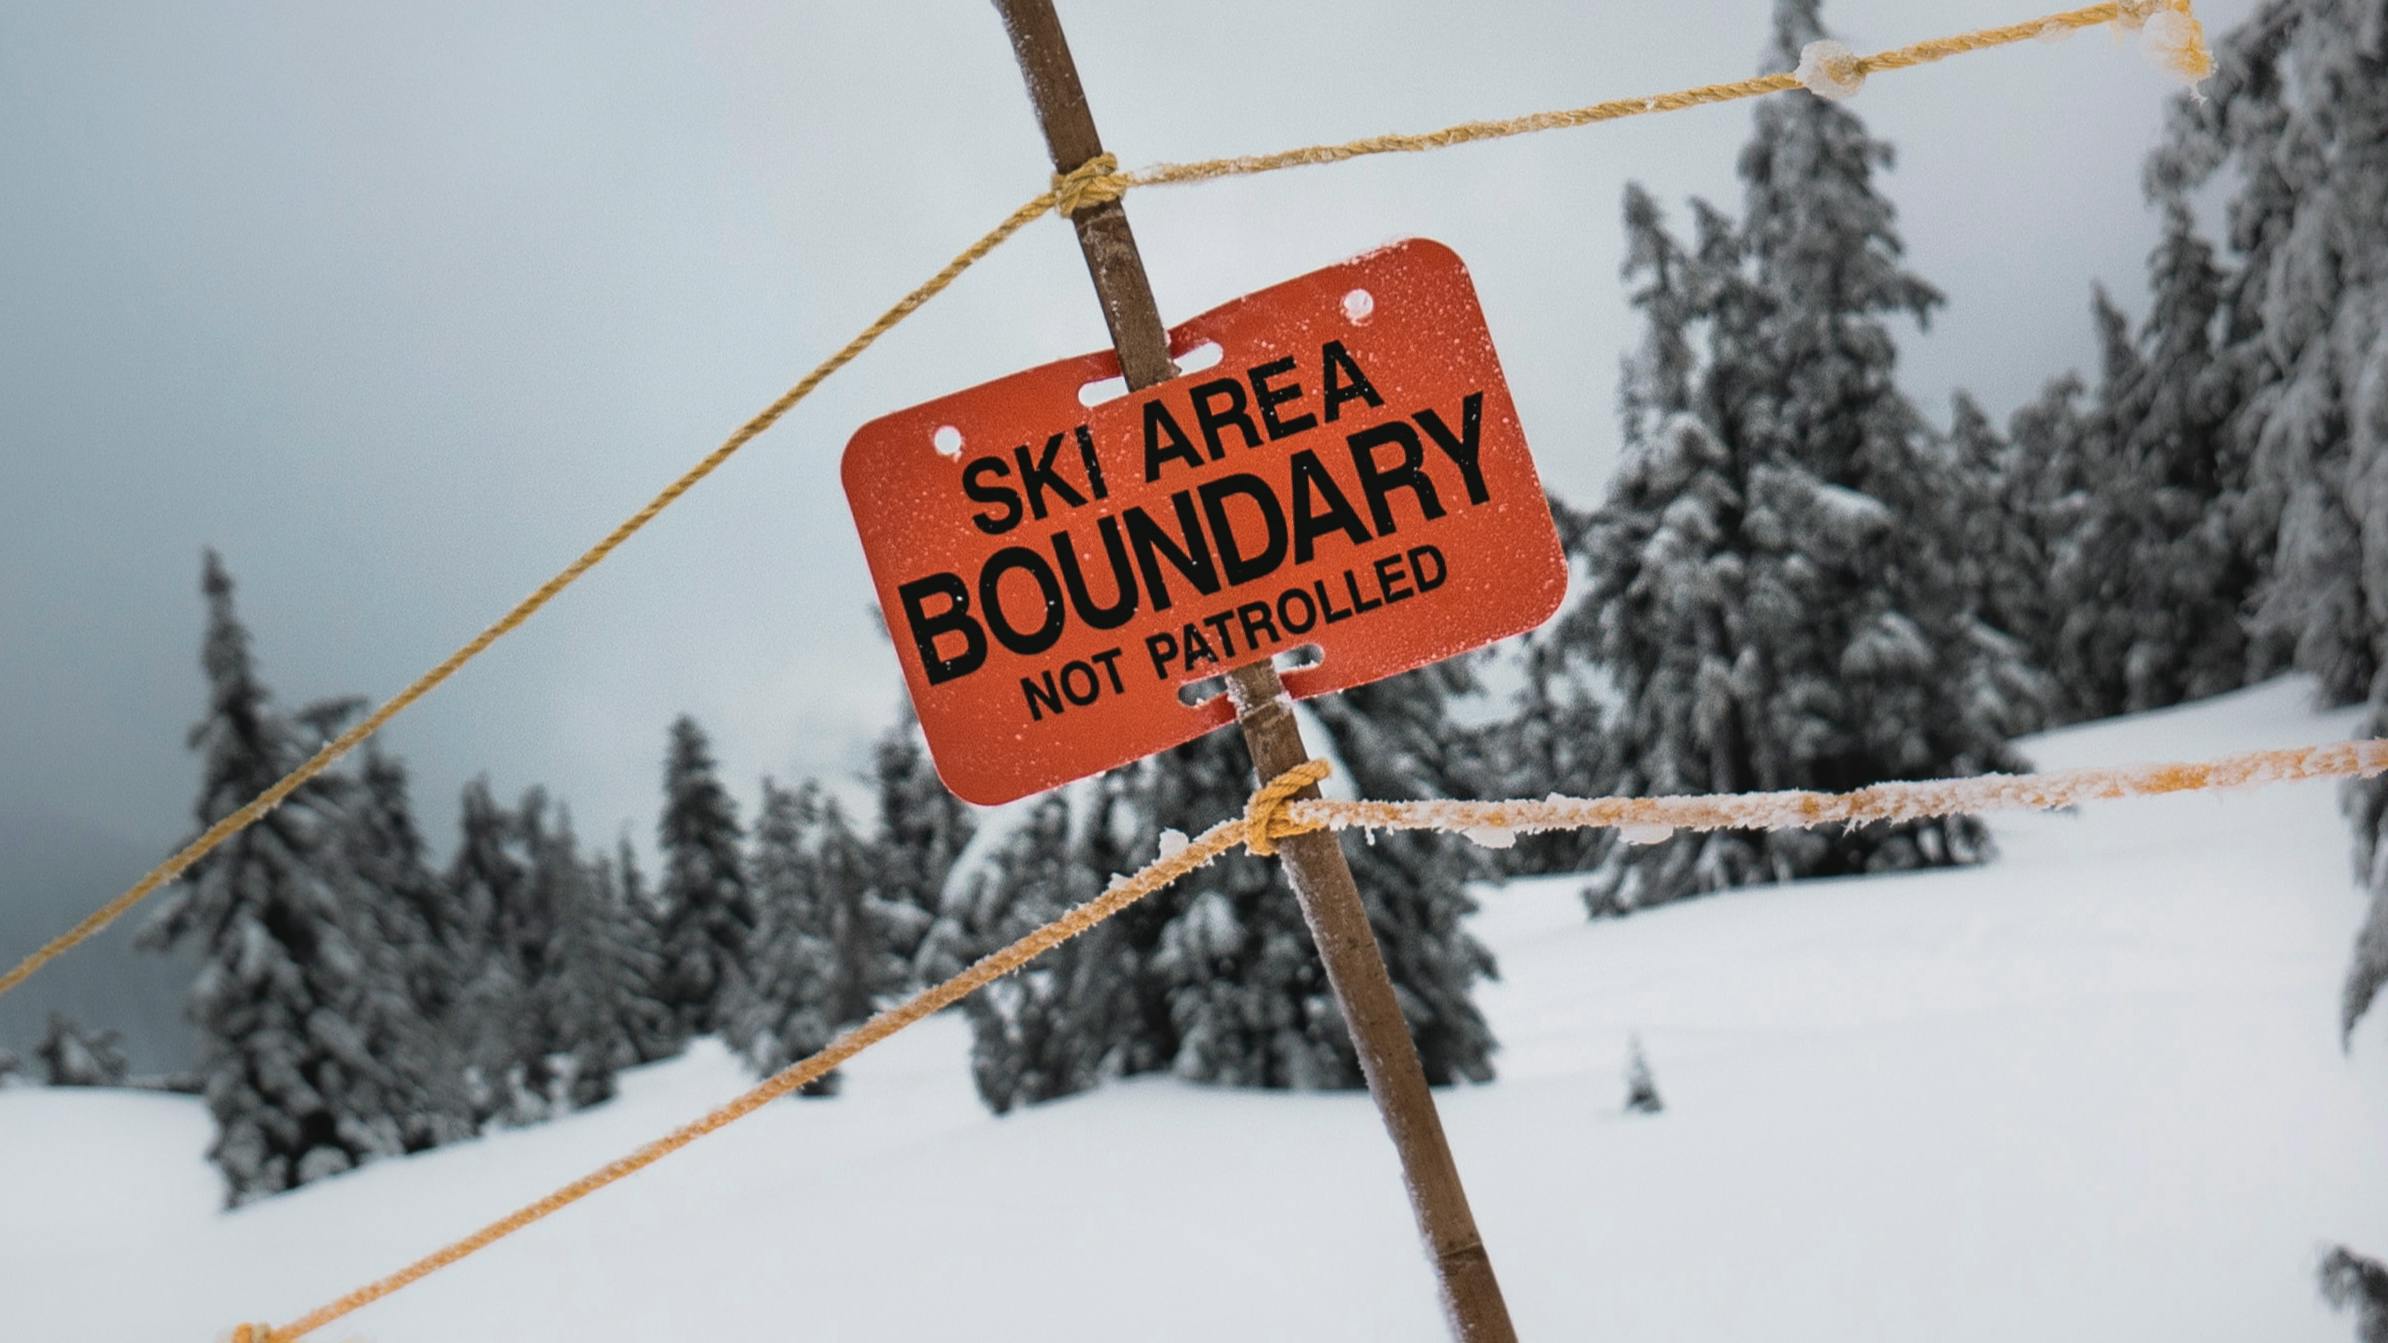 An orange sign reads "Ski Area Boundary. Not Patrolled." with signs roping off the boundary.